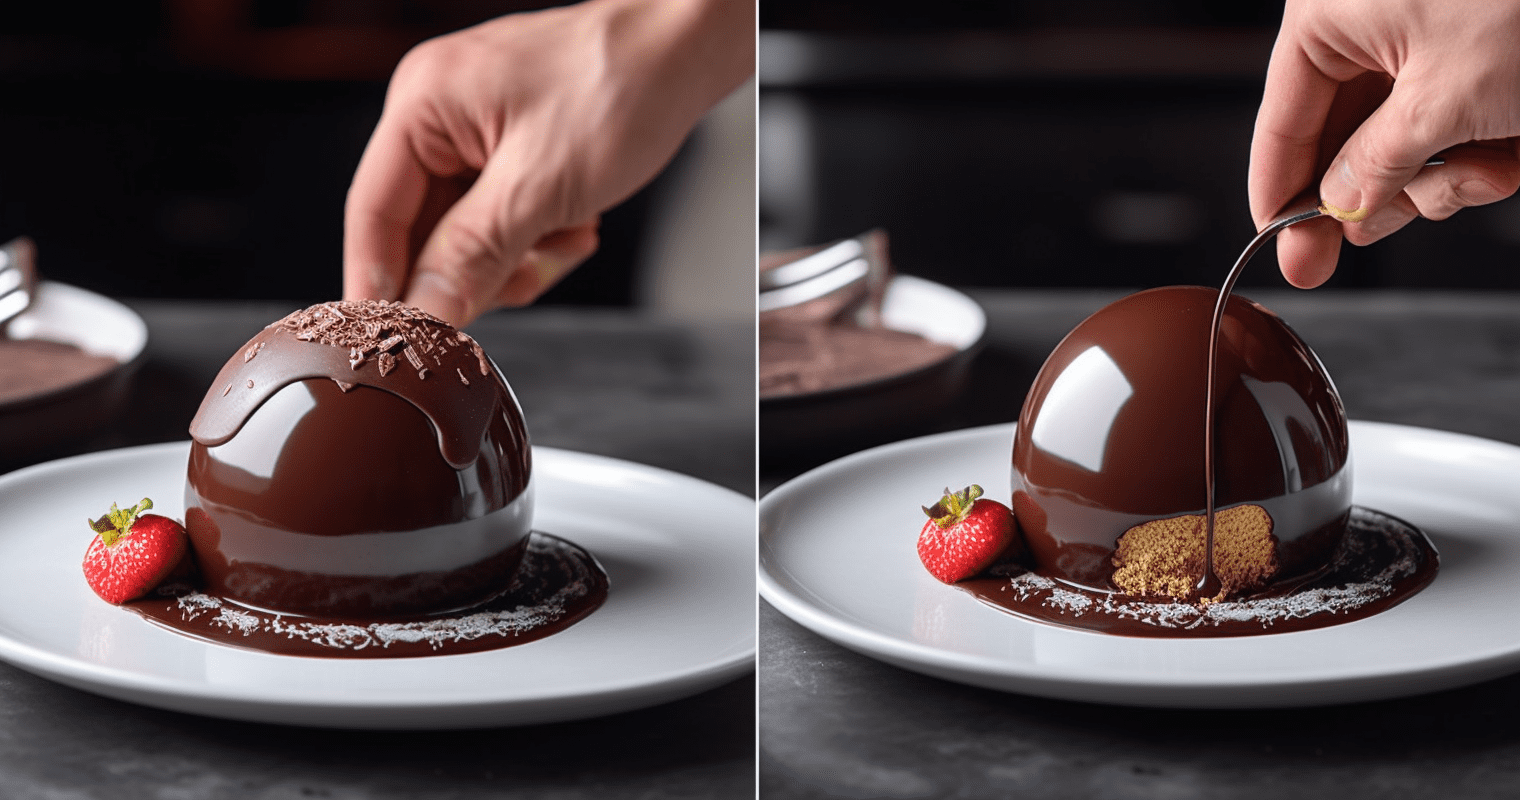 Chocolate Mousse Dome